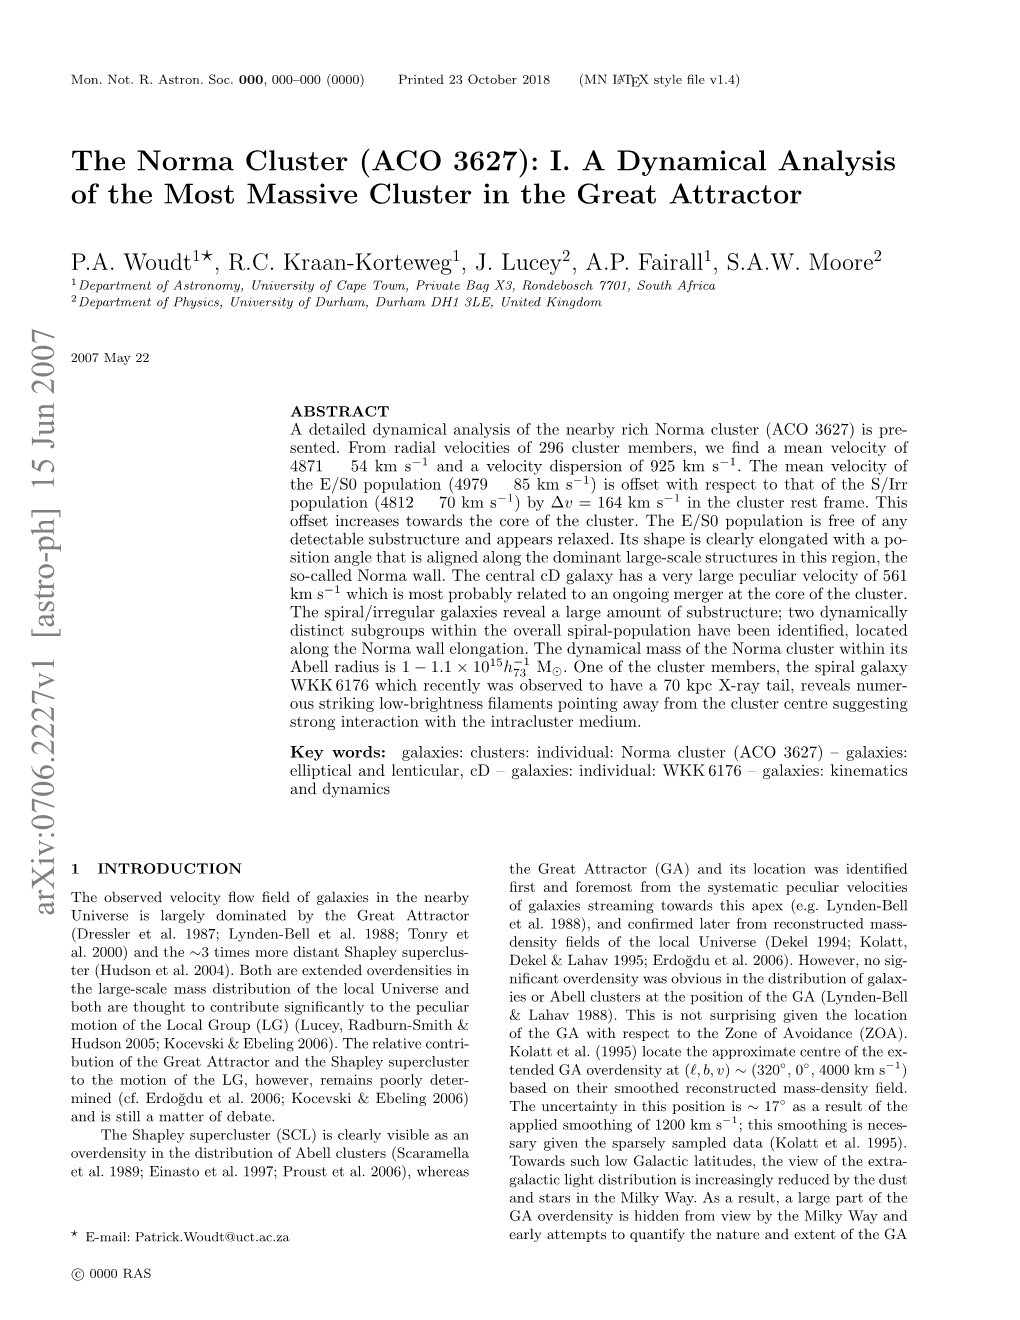 The Norma Cluster (ACO 3627): I. a Dynamical Analysis of the Most